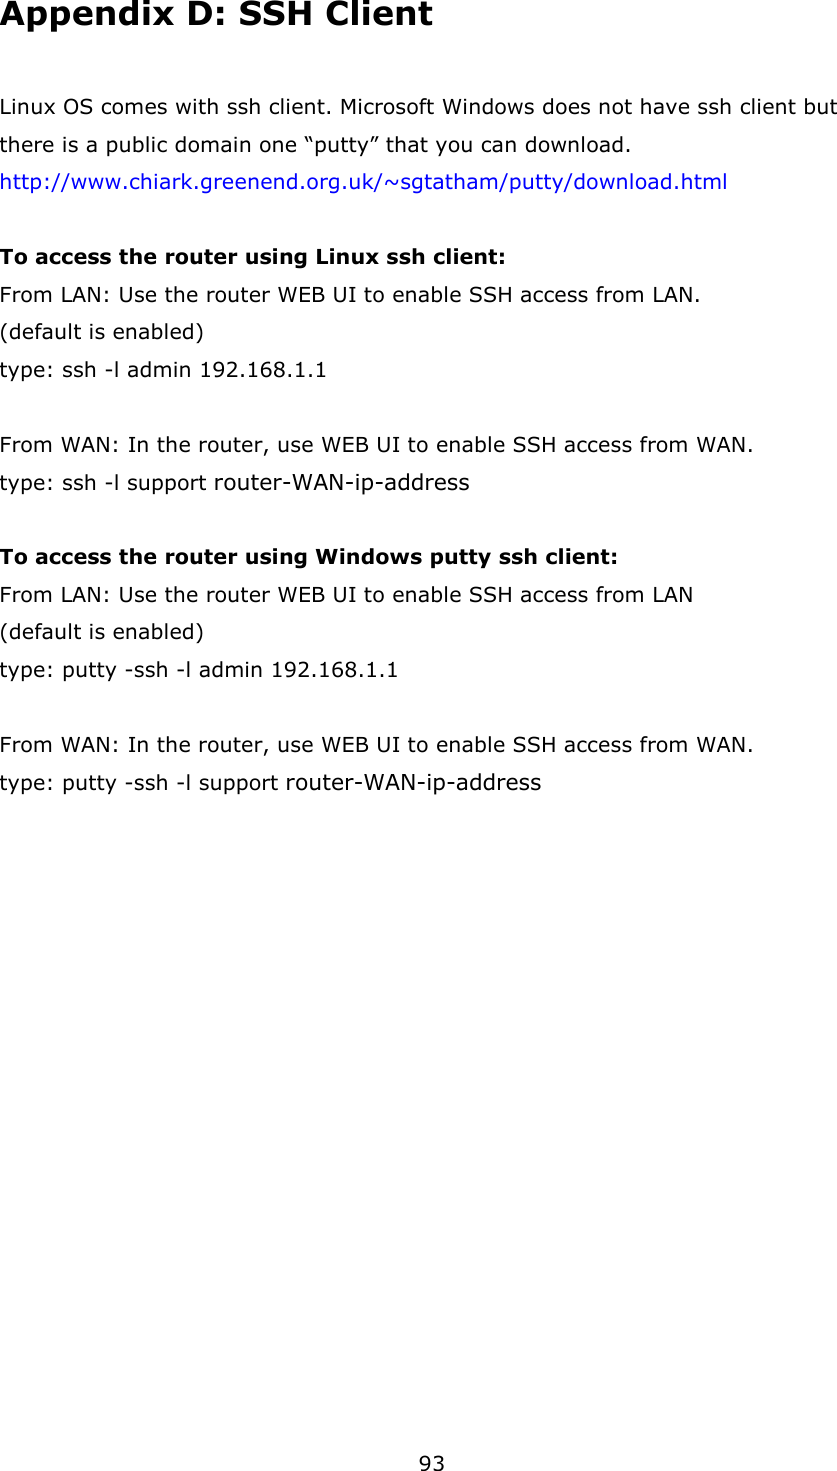 93 Appendix D: SSH Client Linux OS comes with ssh client. Microsoft Windows does not have ssh client but there is a public domain one “putty” that you can download. http://www.chiark.greenend.org.uk/~sgtatham/putty/download.html  To access the router using Linux ssh client: From LAN: Use the router WEB UI to enable SSH access from LAN. (default is enabled) type: ssh -l admin 192.168.1.1  From WAN: In the router, use WEB UI to enable SSH access from WAN. type: ssh -l support router-WAN-ip-address  To access the router using Windows putty ssh client: From LAN: Use the router WEB UI to enable SSH access from LAN (default is enabled) type: putty -ssh -l admin 192.168.1.1  From WAN: In the router, use WEB UI to enable SSH access from WAN. type: putty -ssh -l support router-WAN-ip-address     